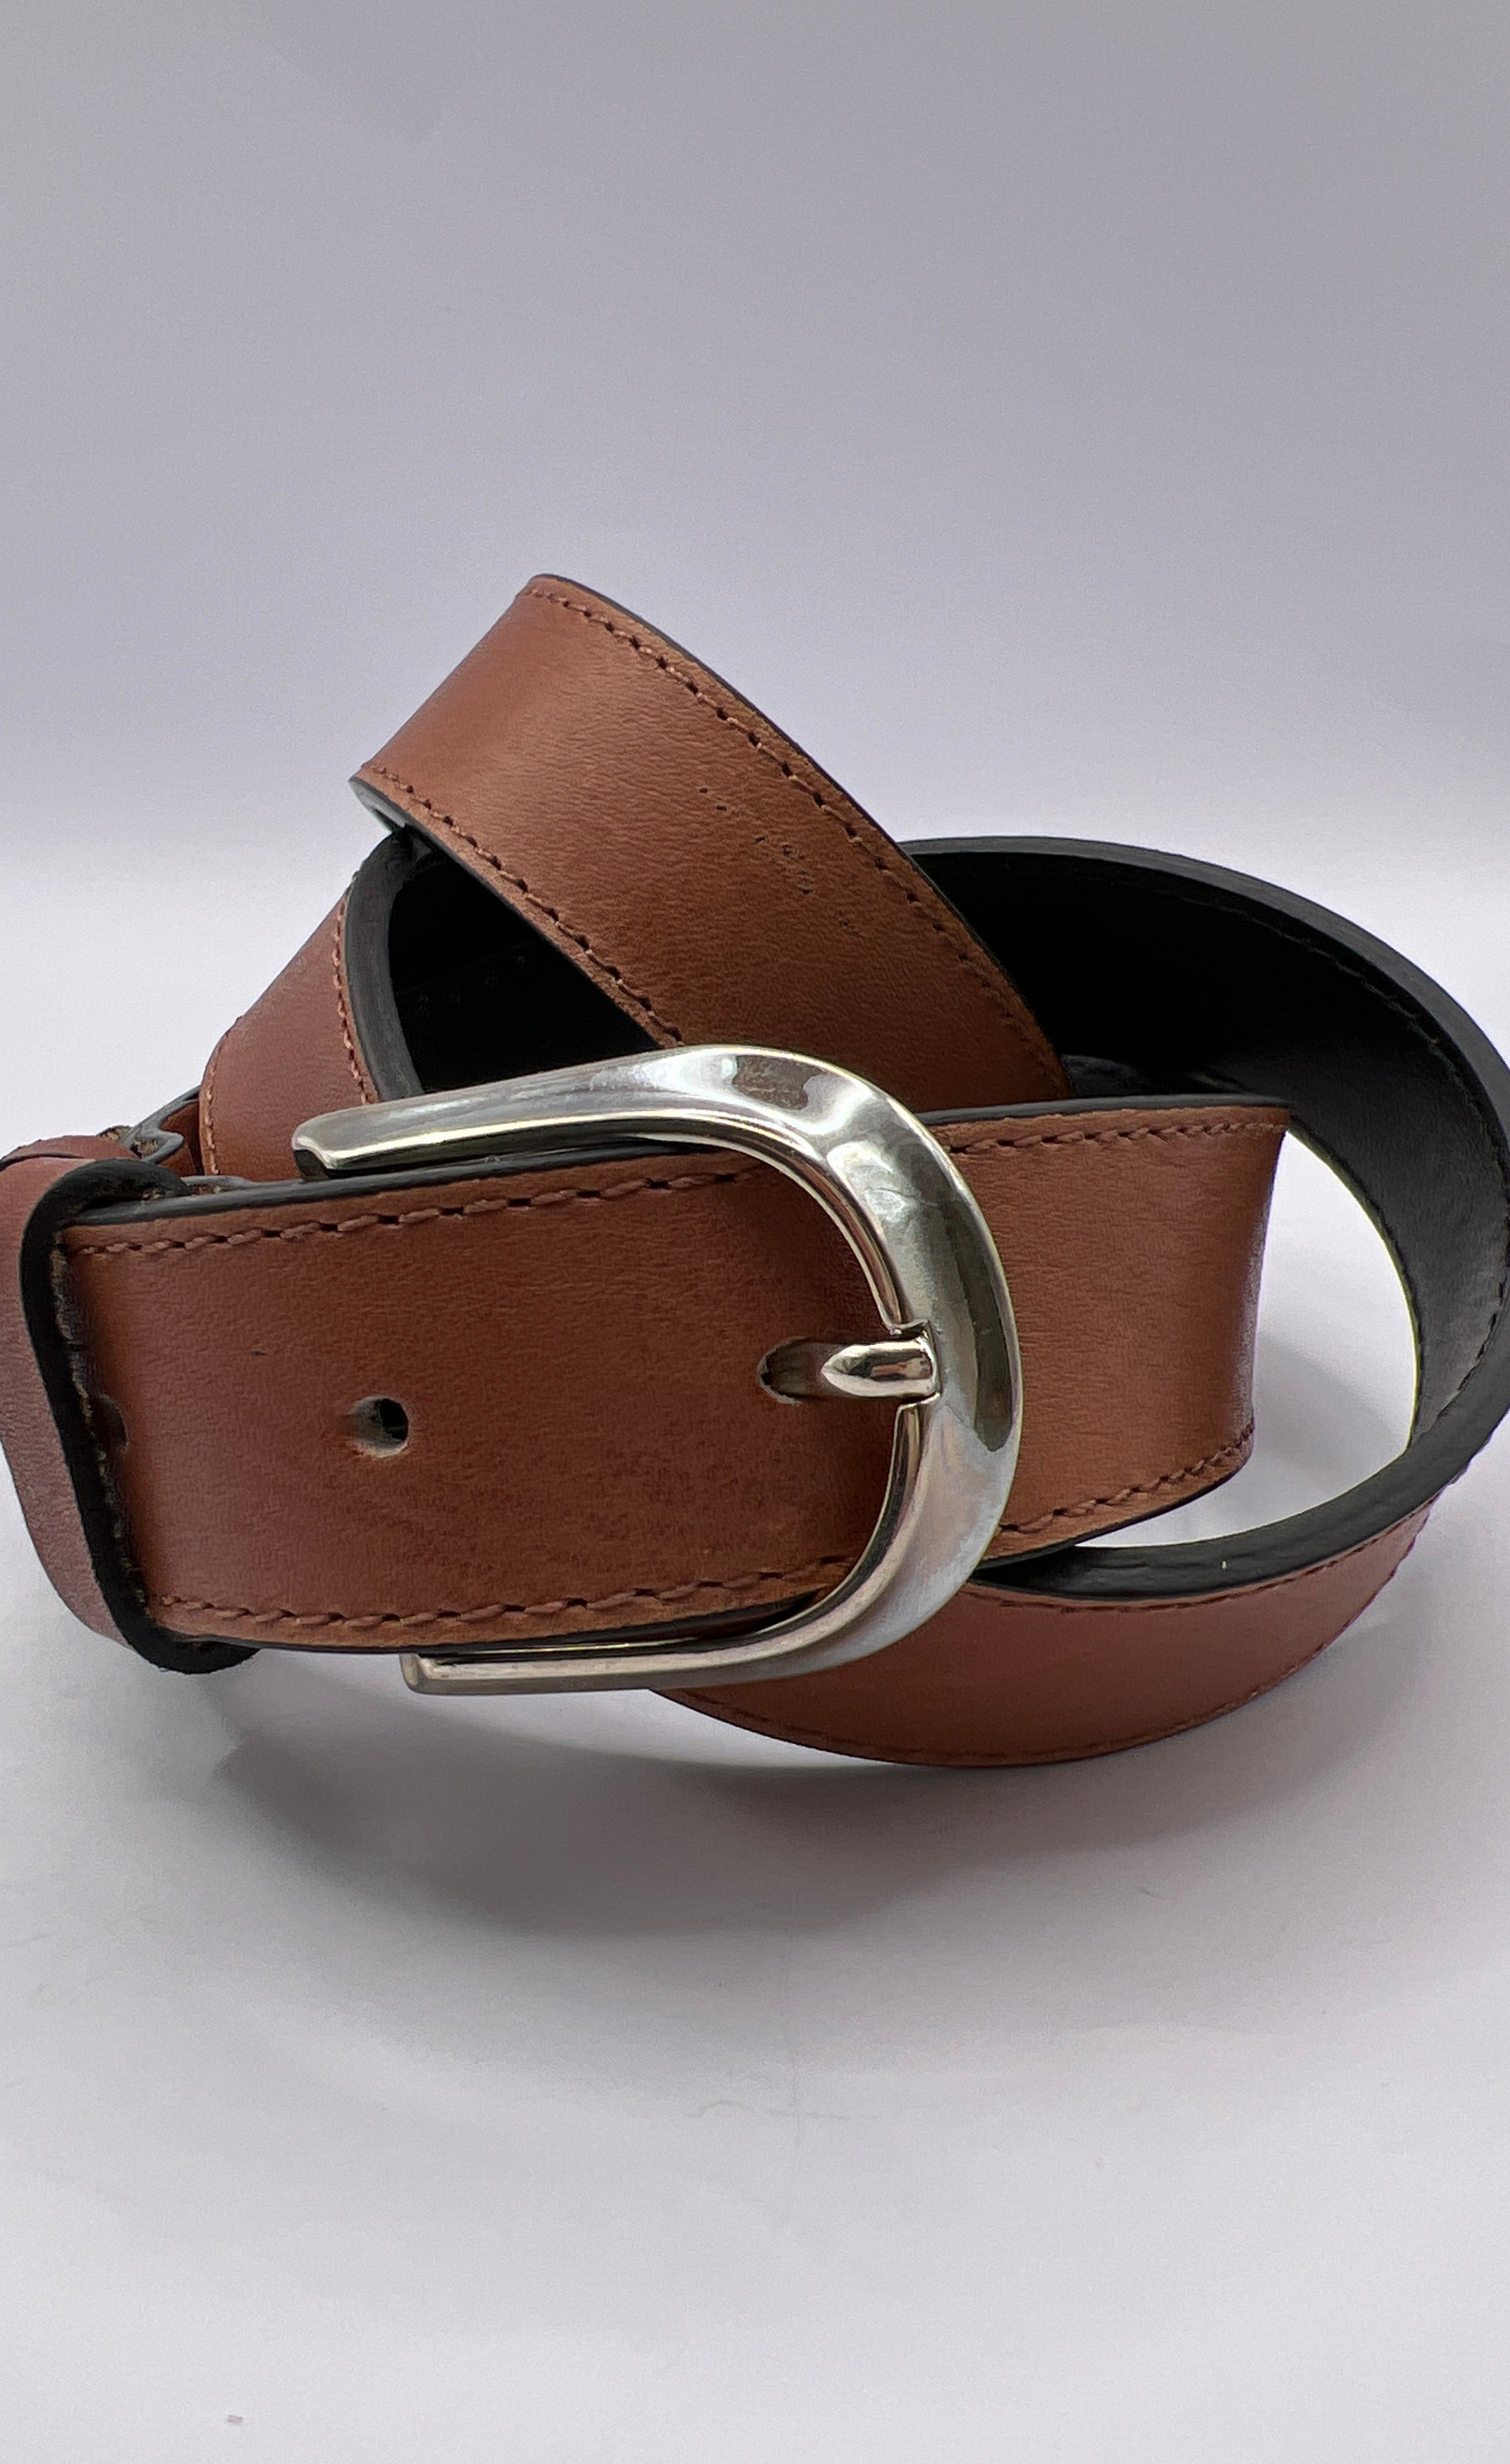 Blondish Brown Handmade Leather Belt with Silver Adornment for Women BLONDISH